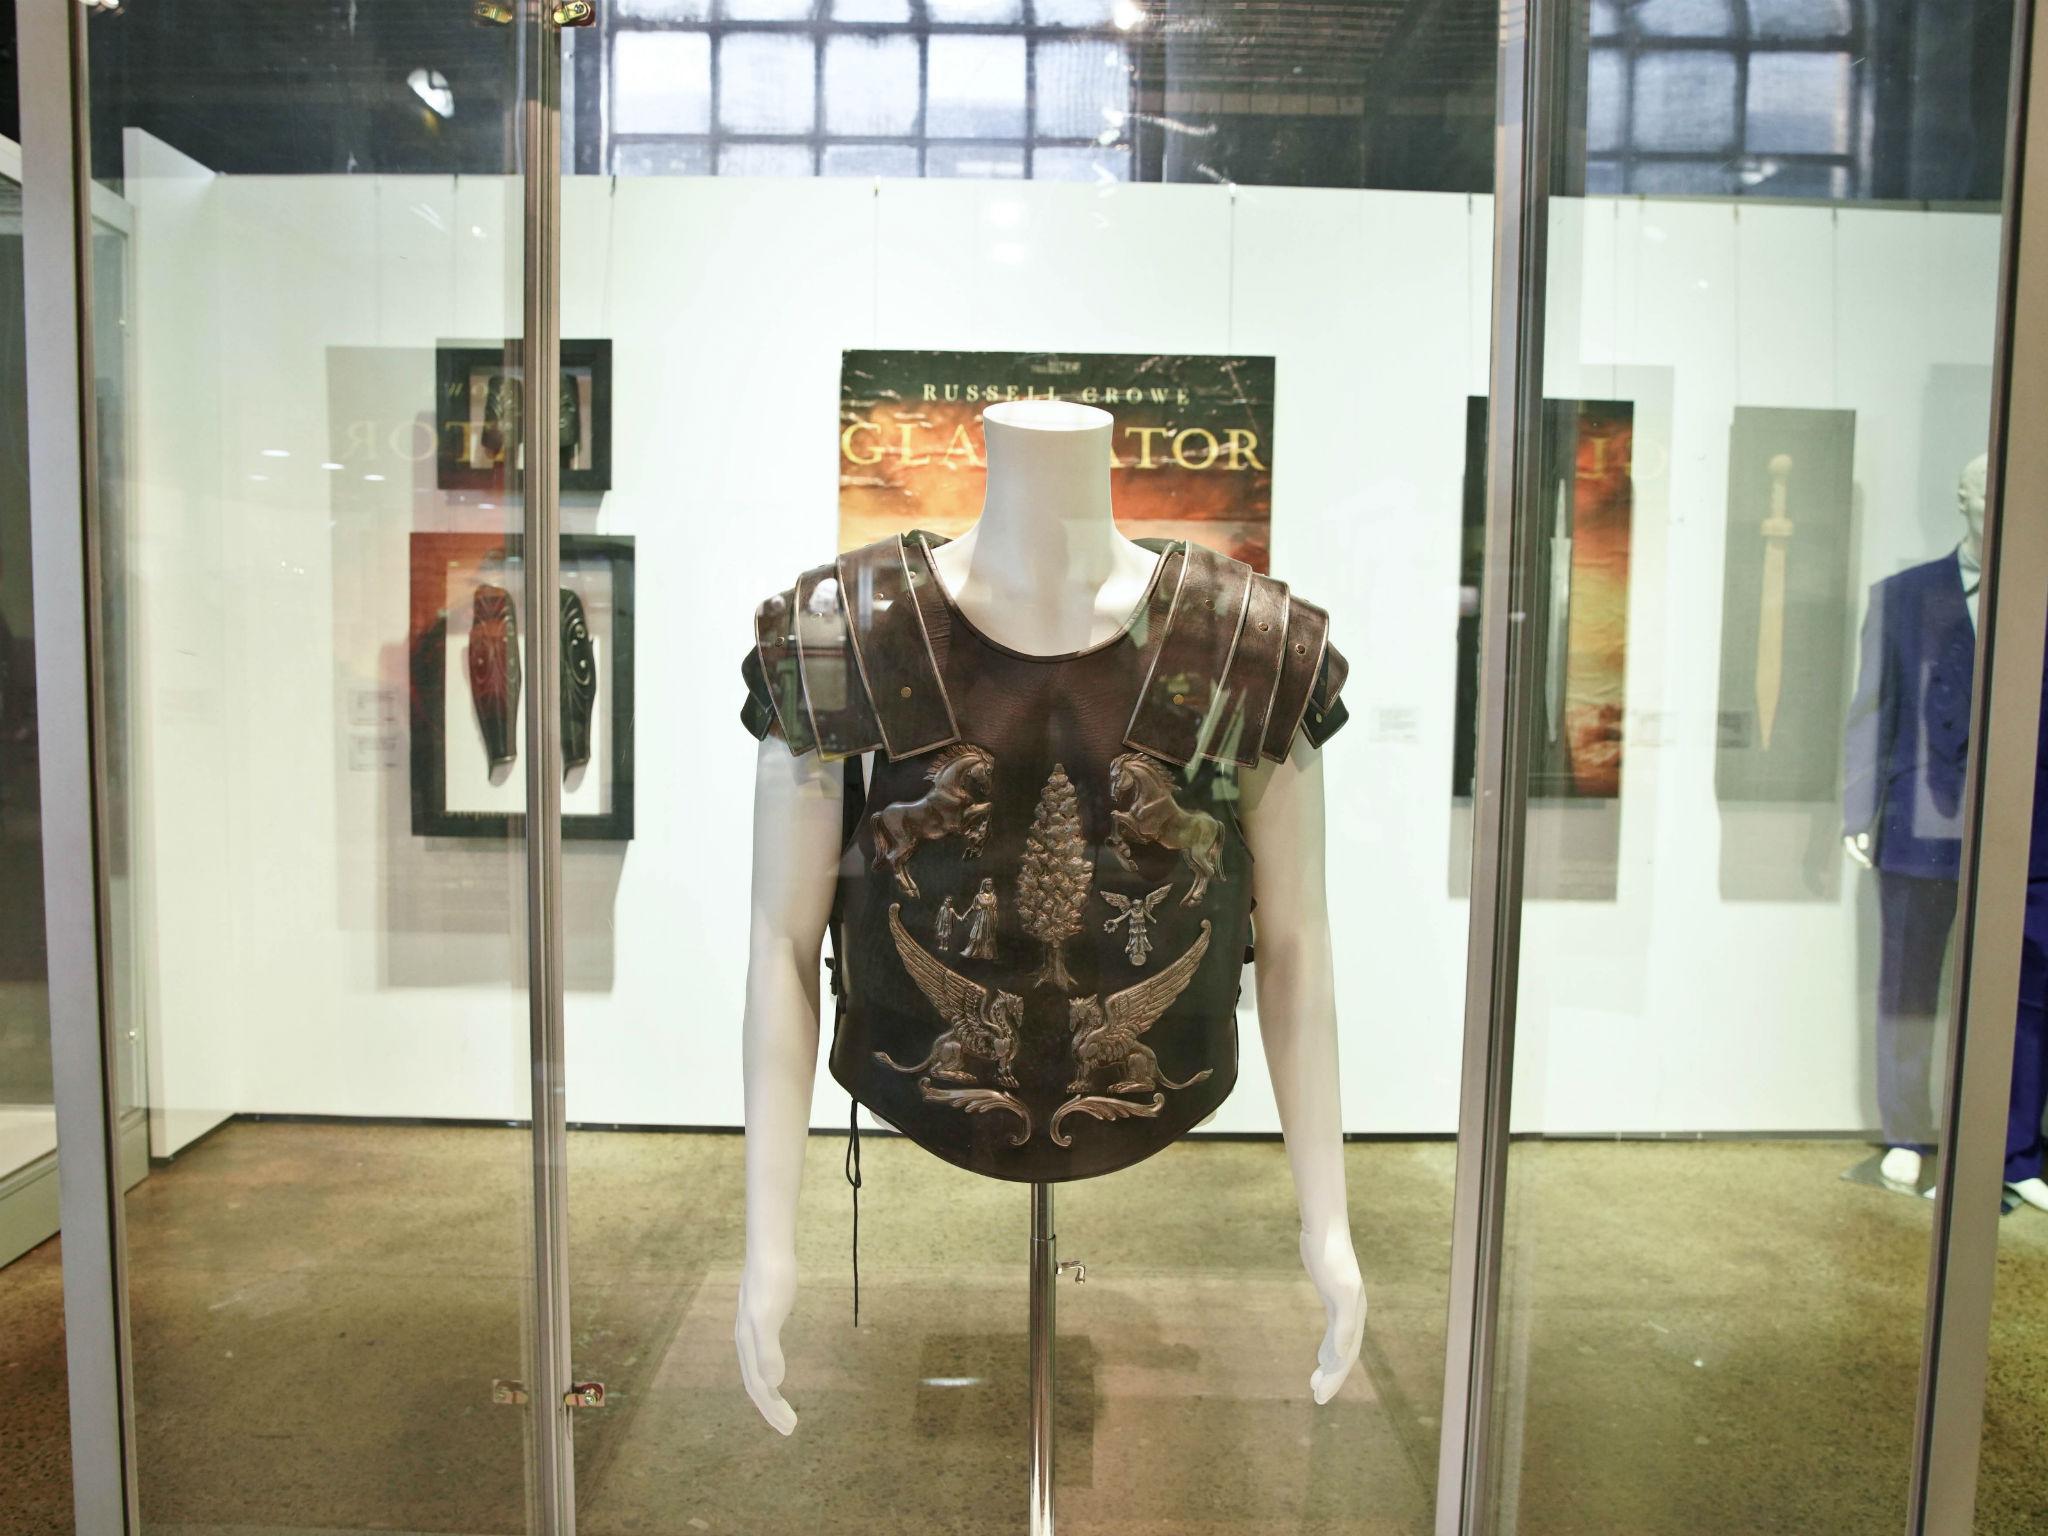 &#13;
A breastplate worn by Crowe in 'Gladiator' went for $125,000 &#13;